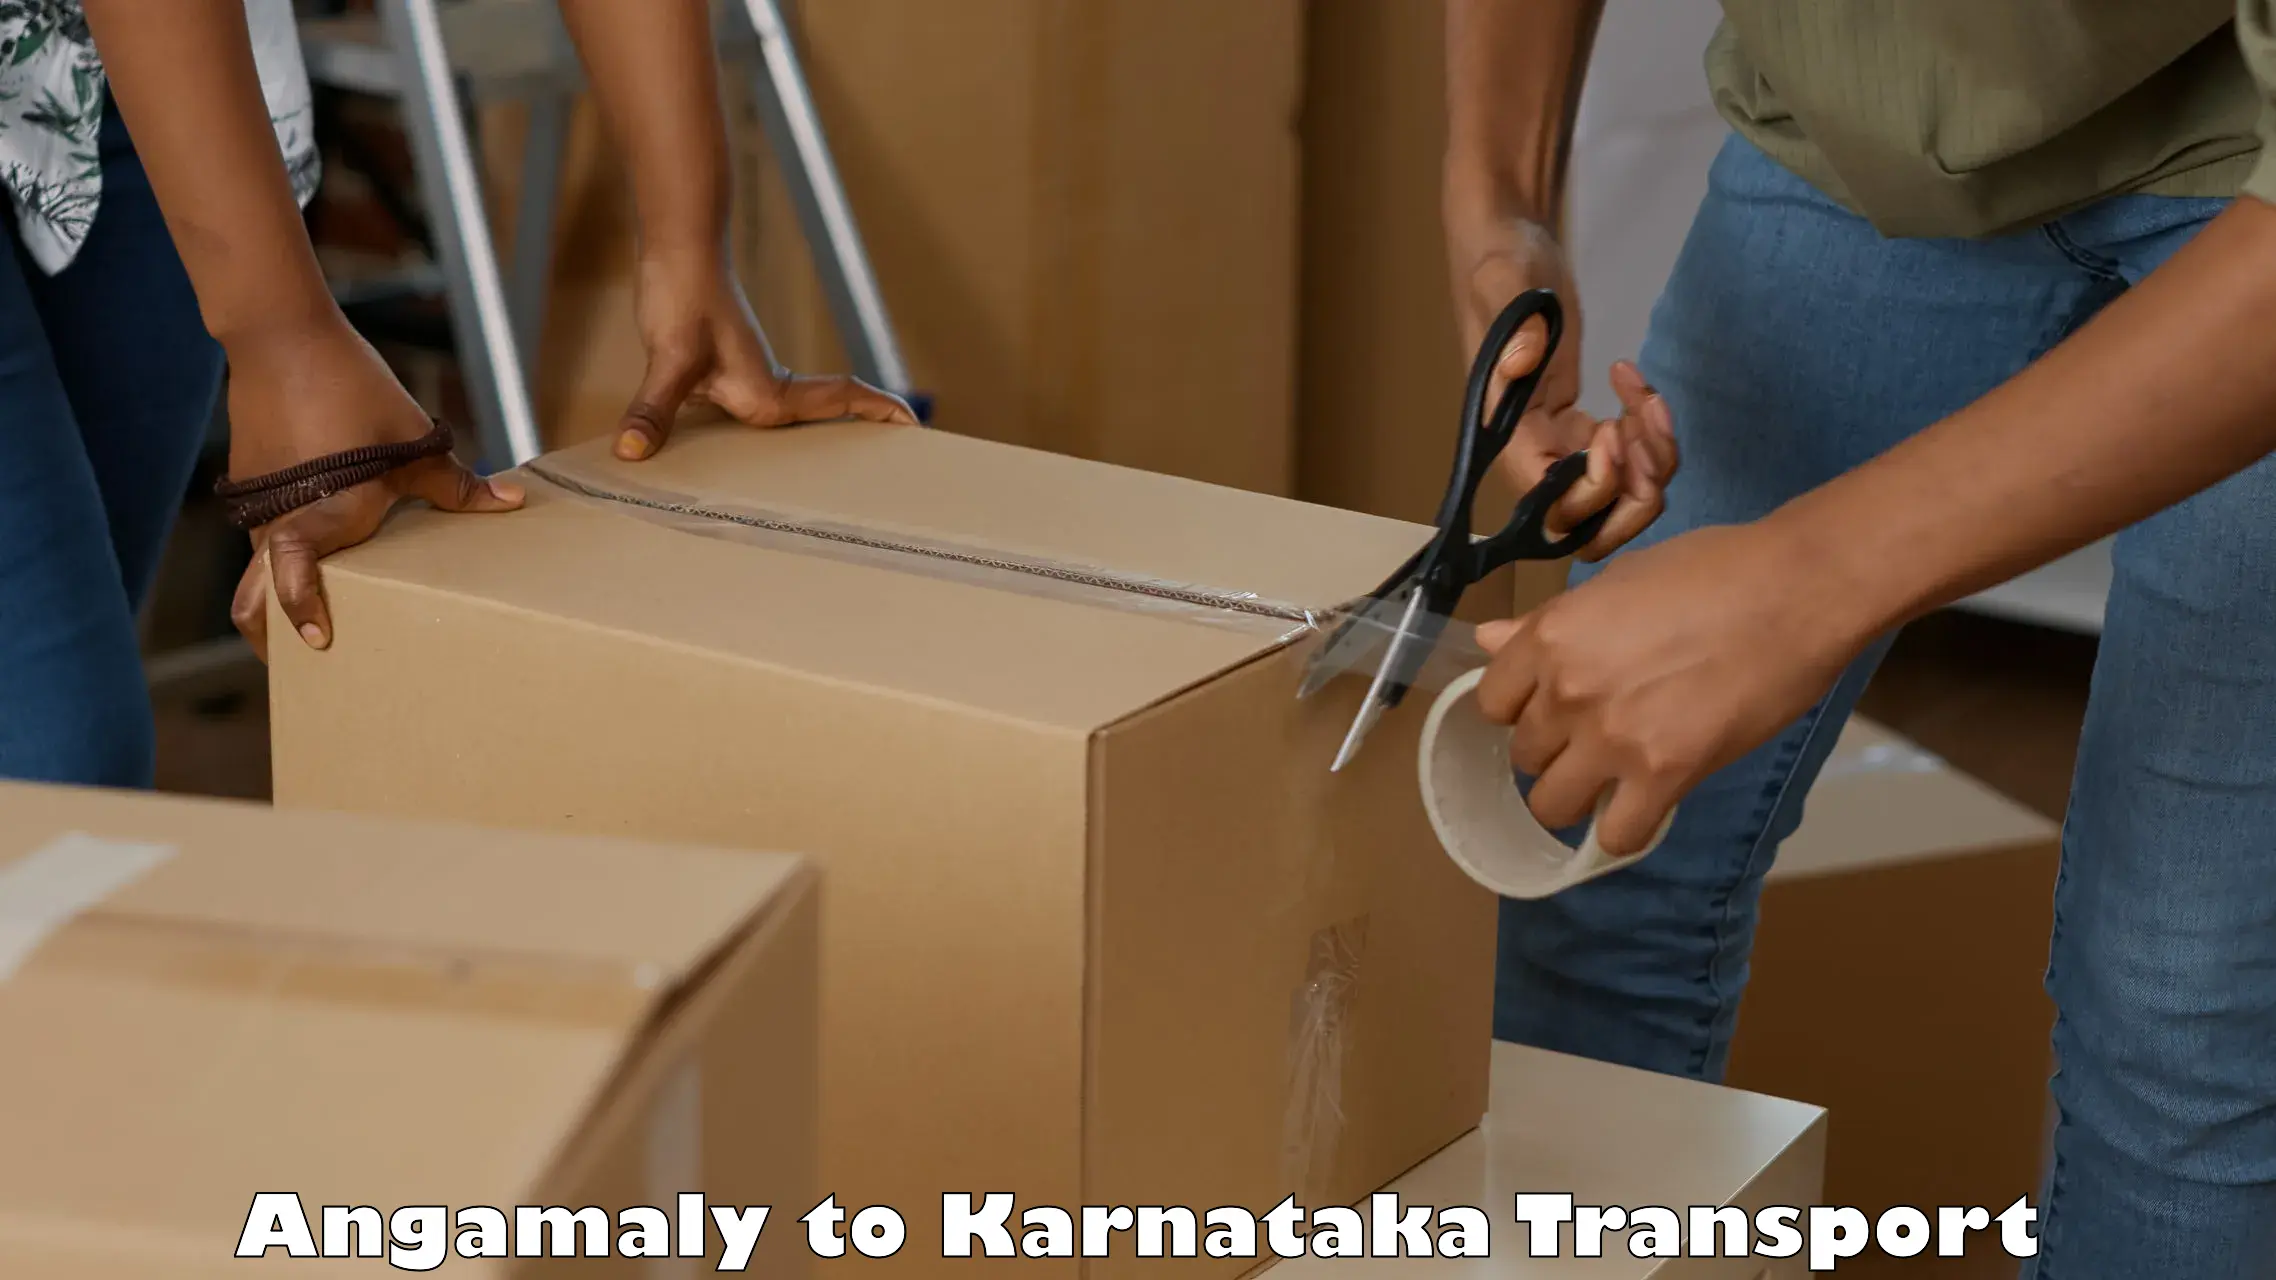 Truck transport companies in India Angamaly to Bengaluru